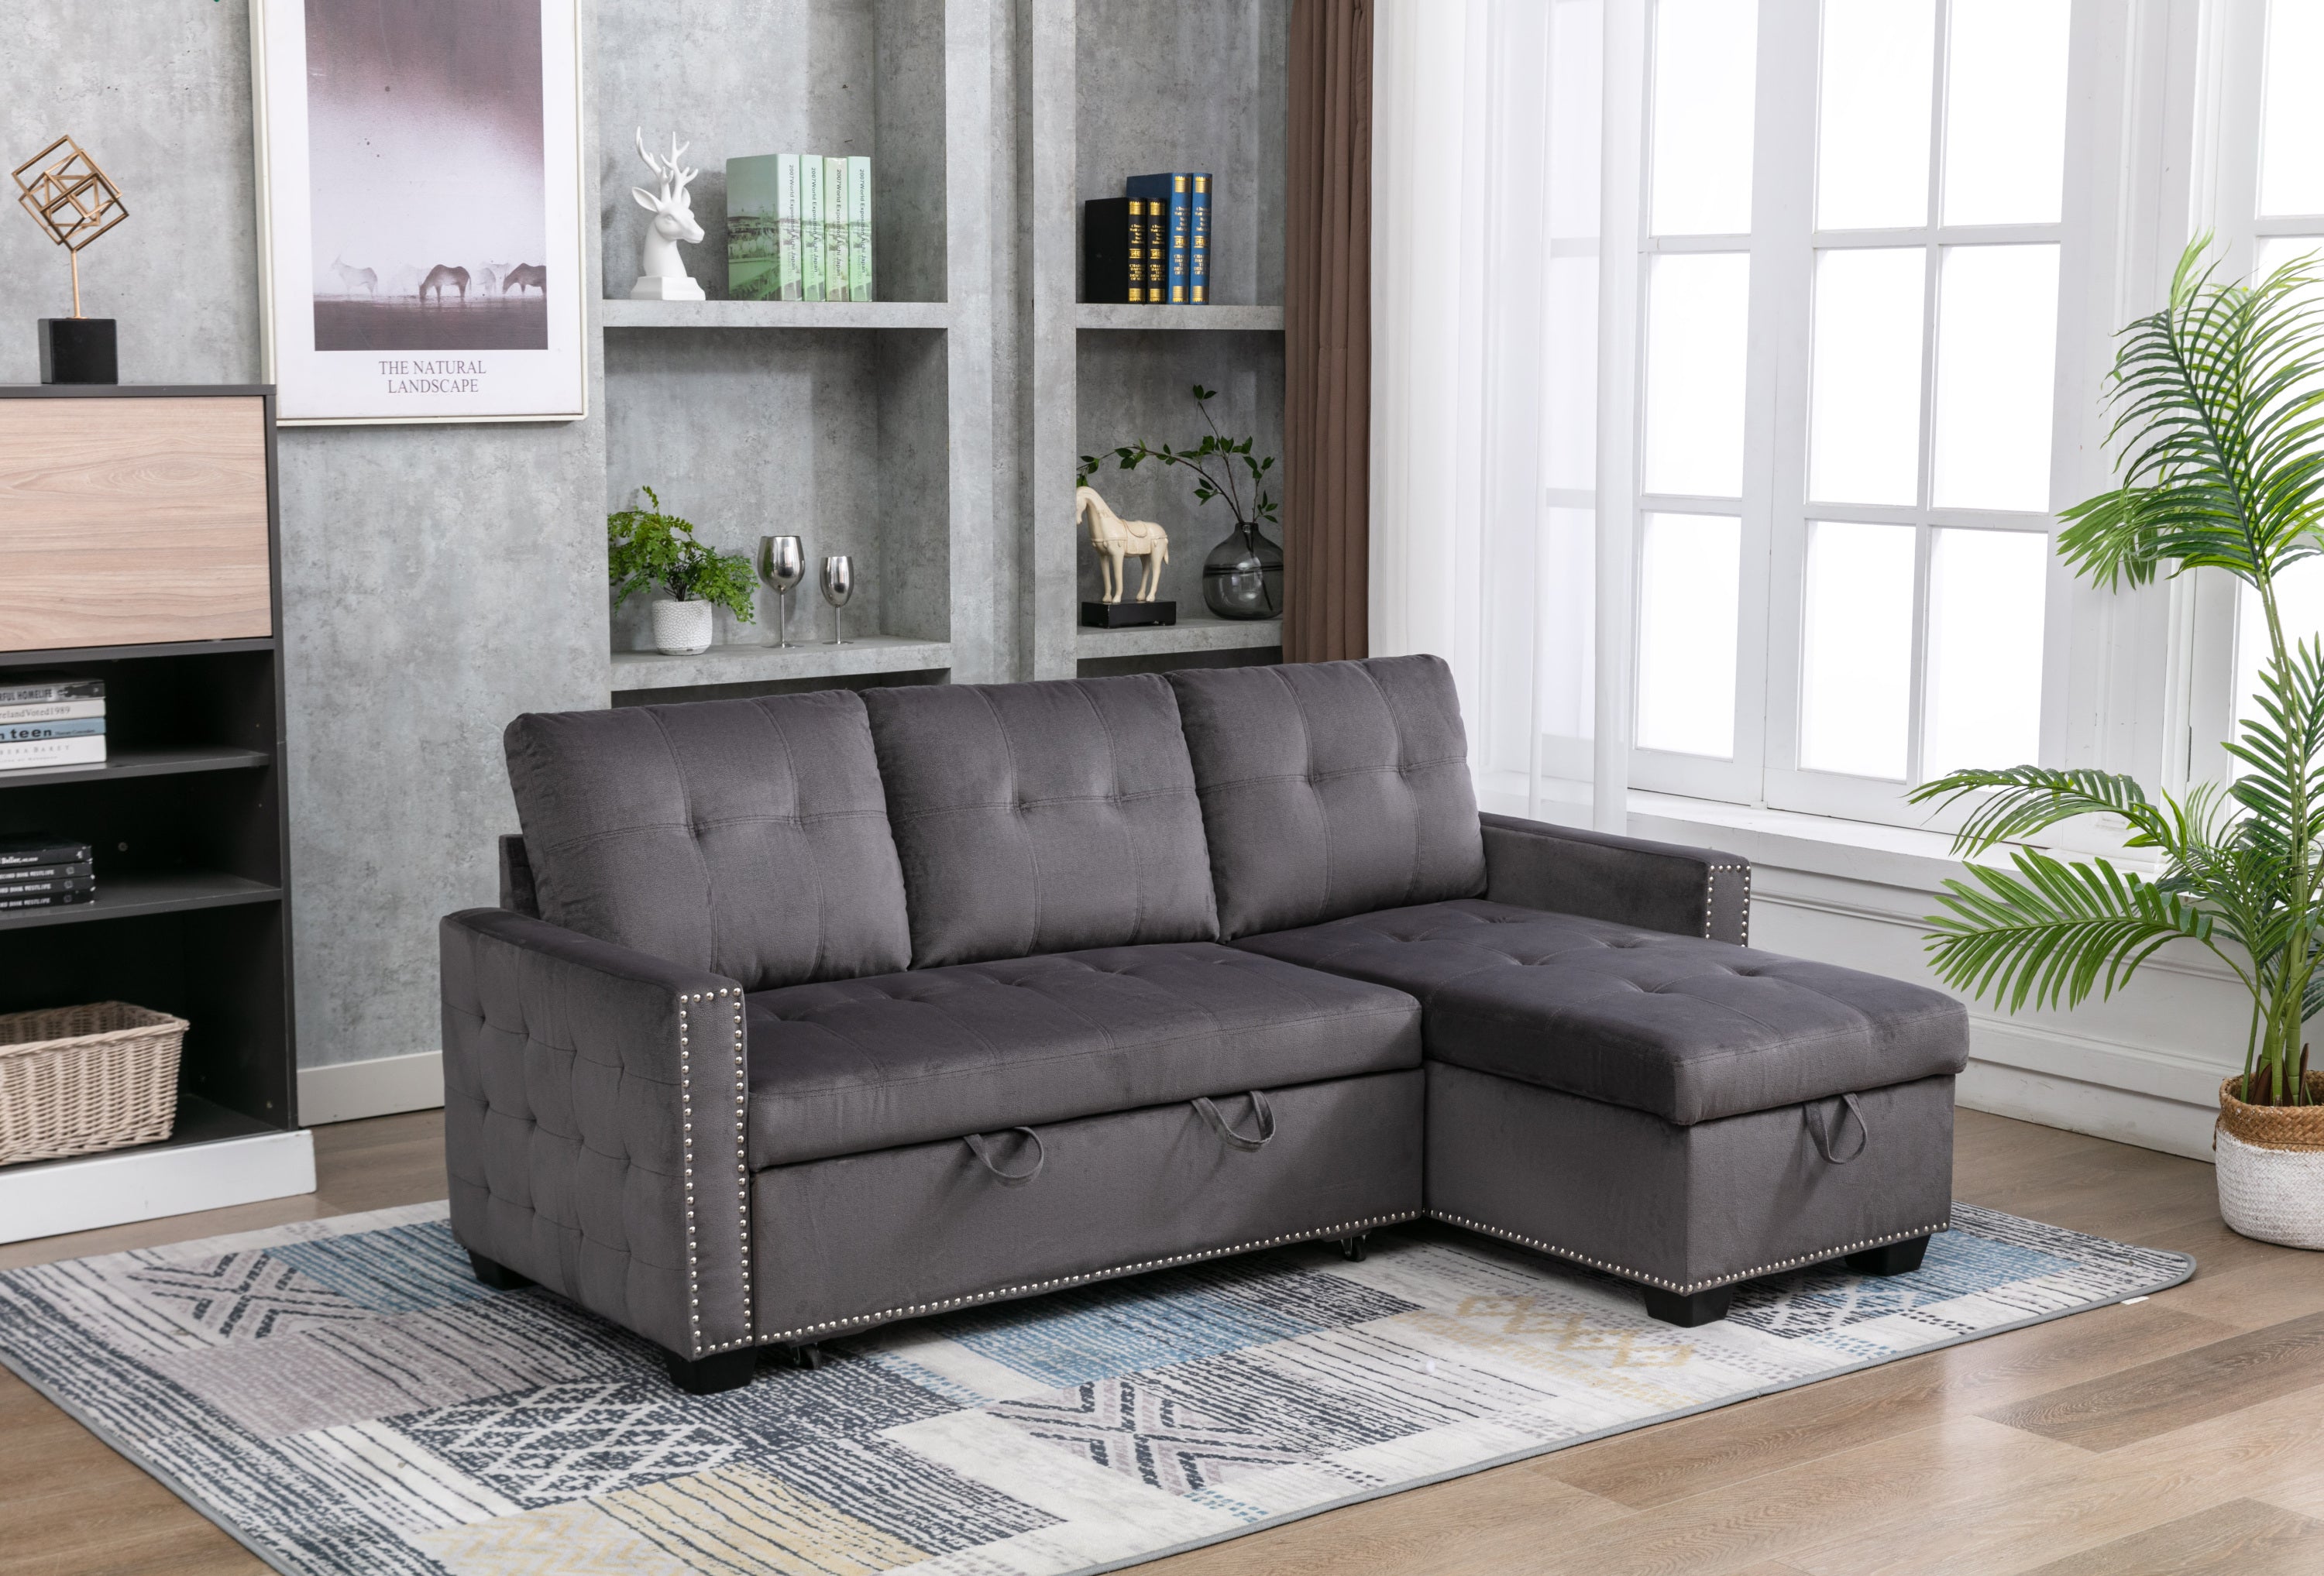 77 Inch Reversible Sectional Storage Sleeper Sofa Bed | L-Shape 2-Seat Sectional Chaise with Storage | Skin-Feeling Velvet Fabric | Dark Grey Color | Stylish Addition to Living Room Furniture